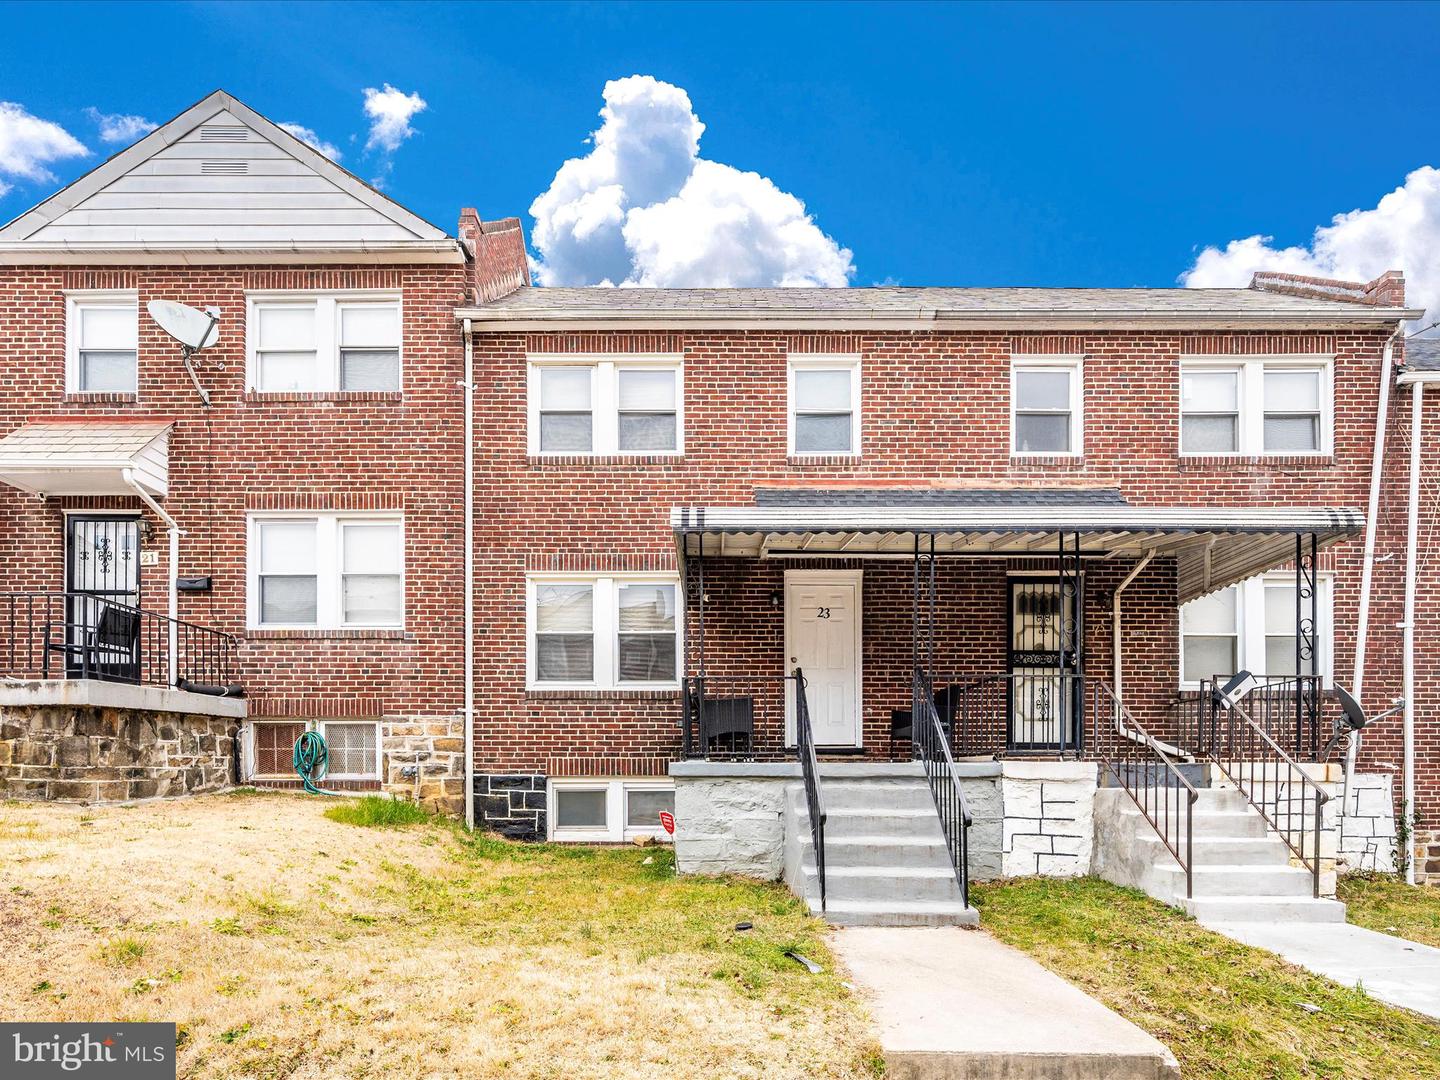 View Baltimore, MD 21229 townhome